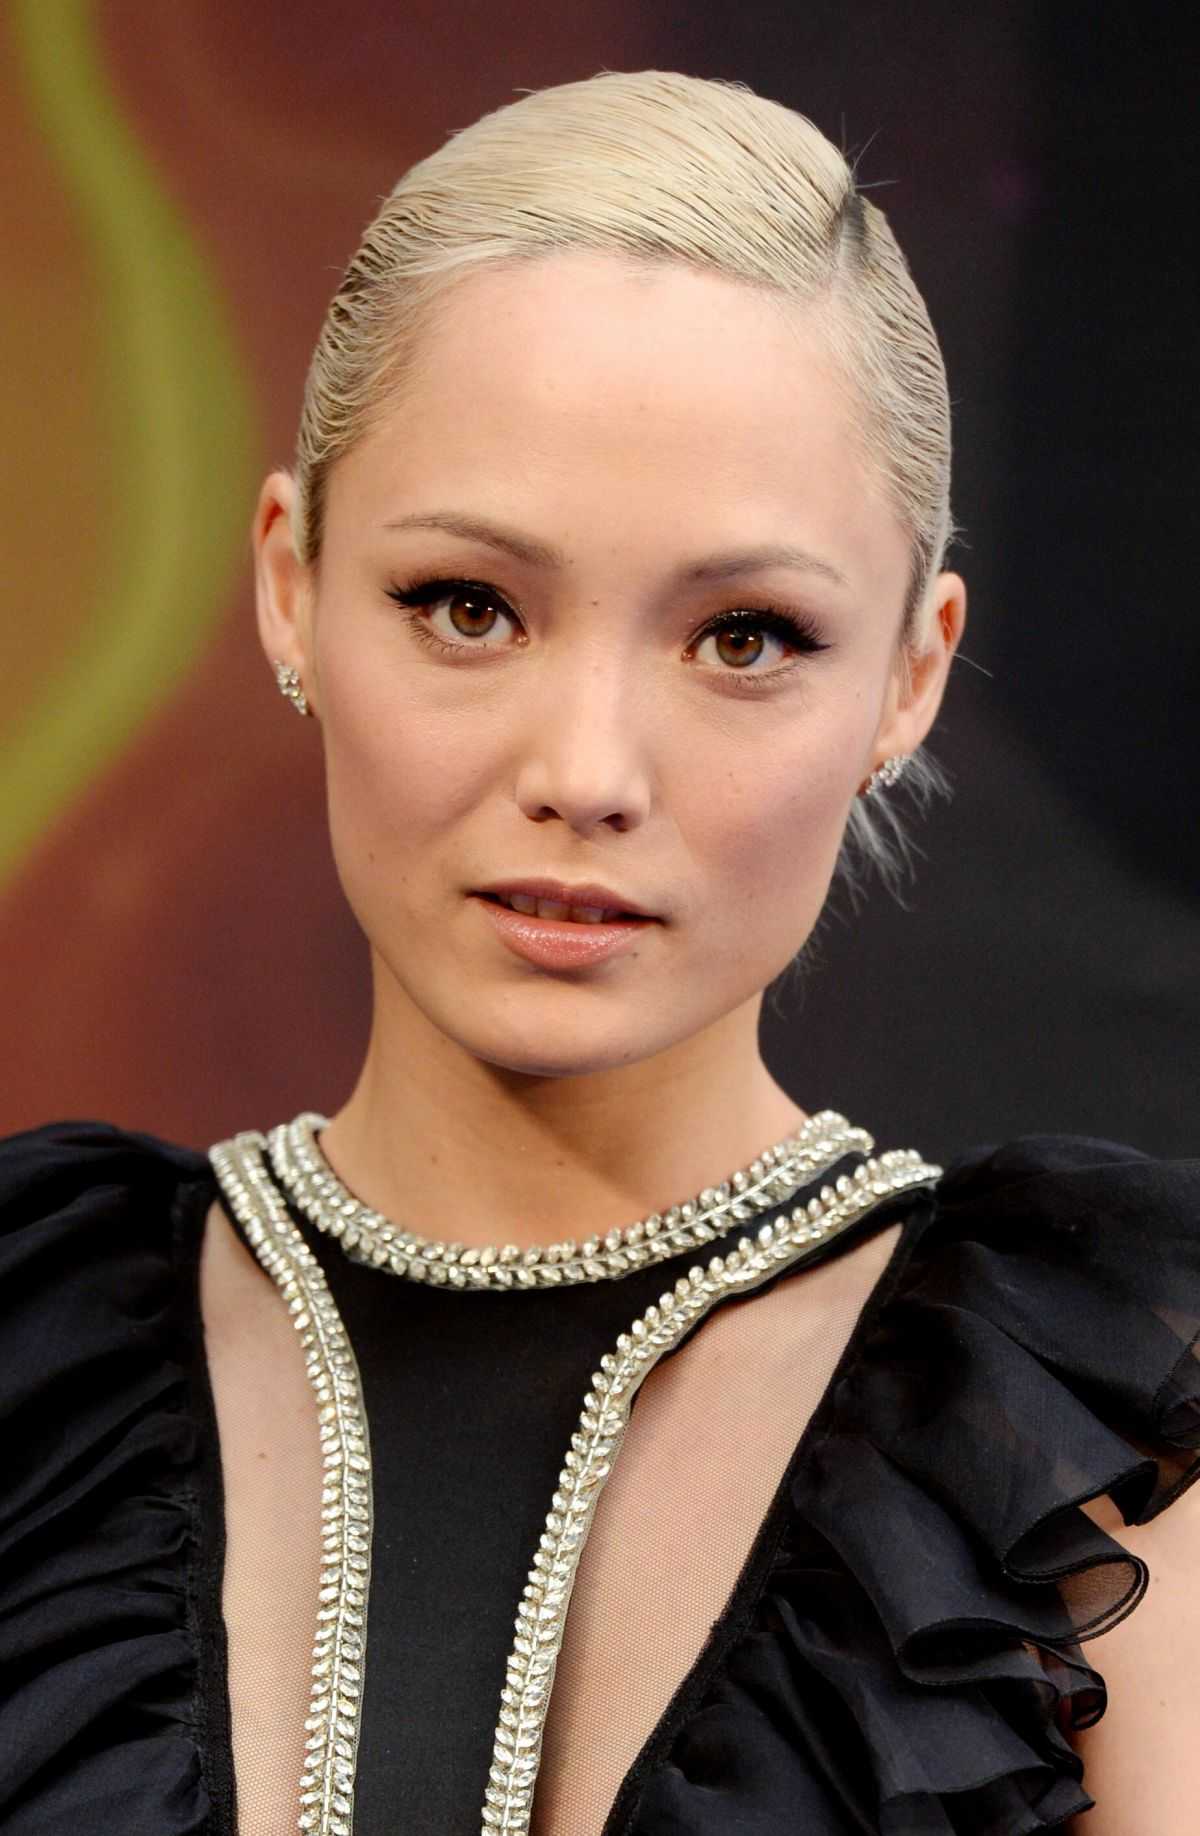 70+ Hot Pictures Of Pom Klementieff Who Plays Mantis In Marvel Cinematic Universe 127